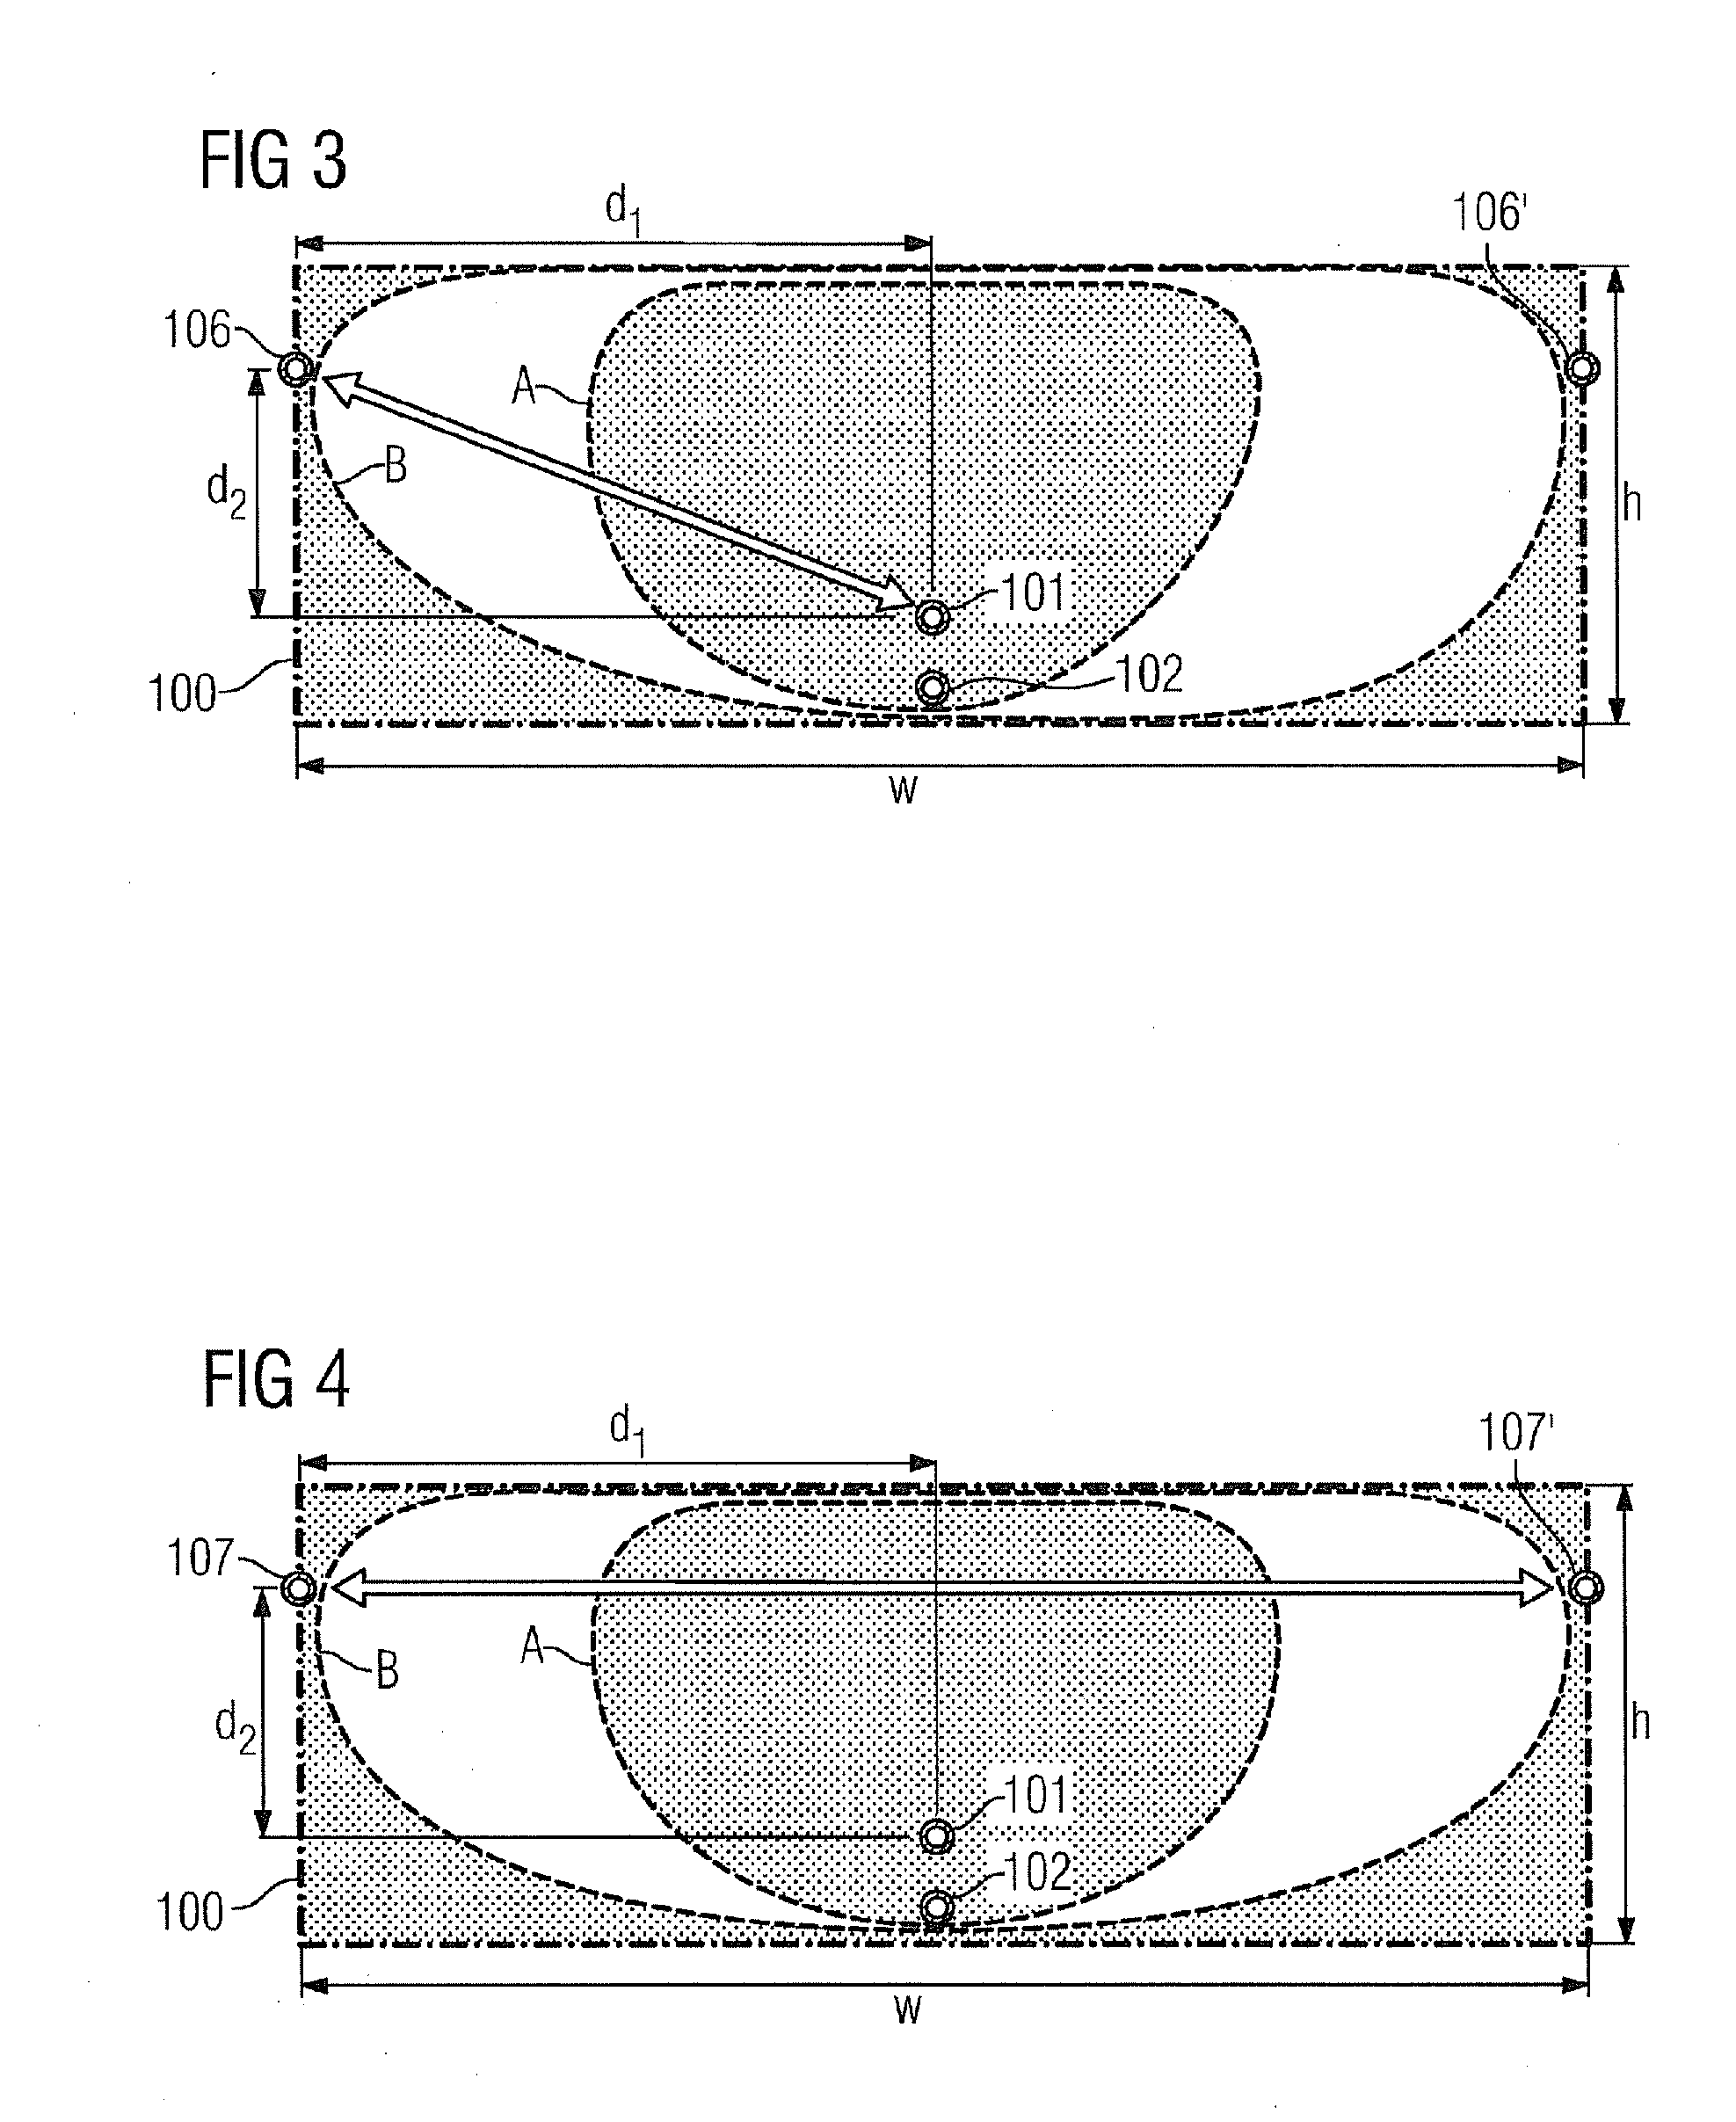 Method and Apparatus for In Situ Extraction of Bitumen or Very Heavy Oil